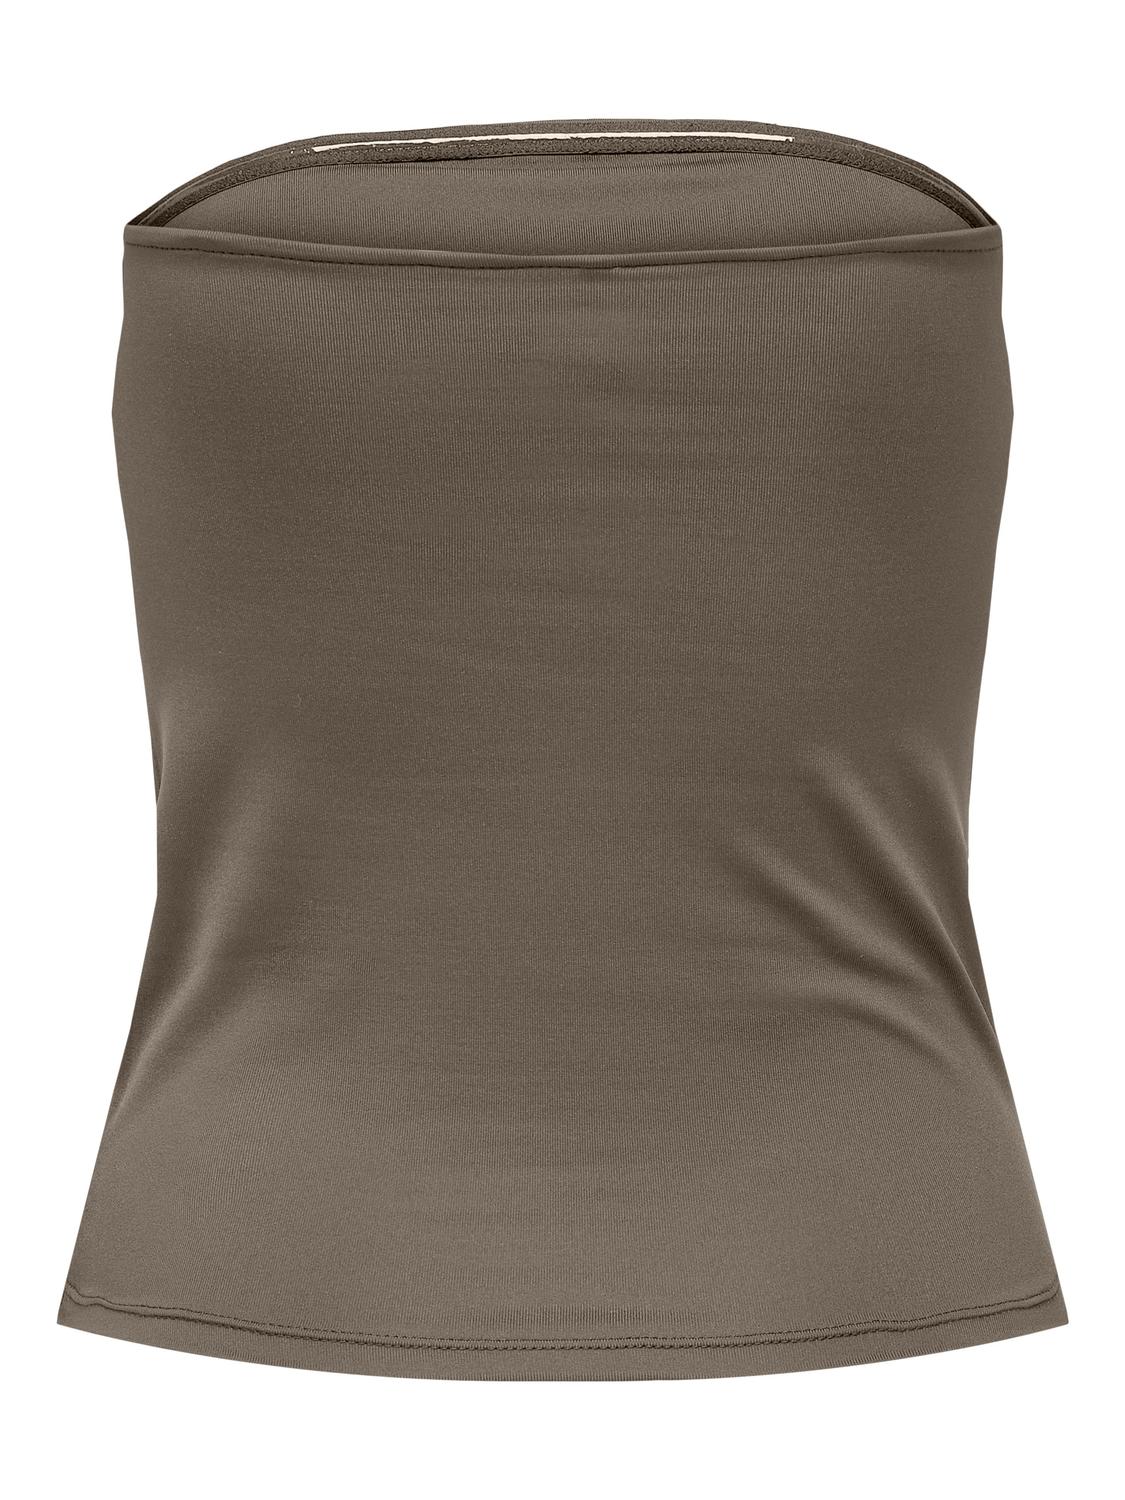 ONLY o-neck tube top -Walnut - 15302781